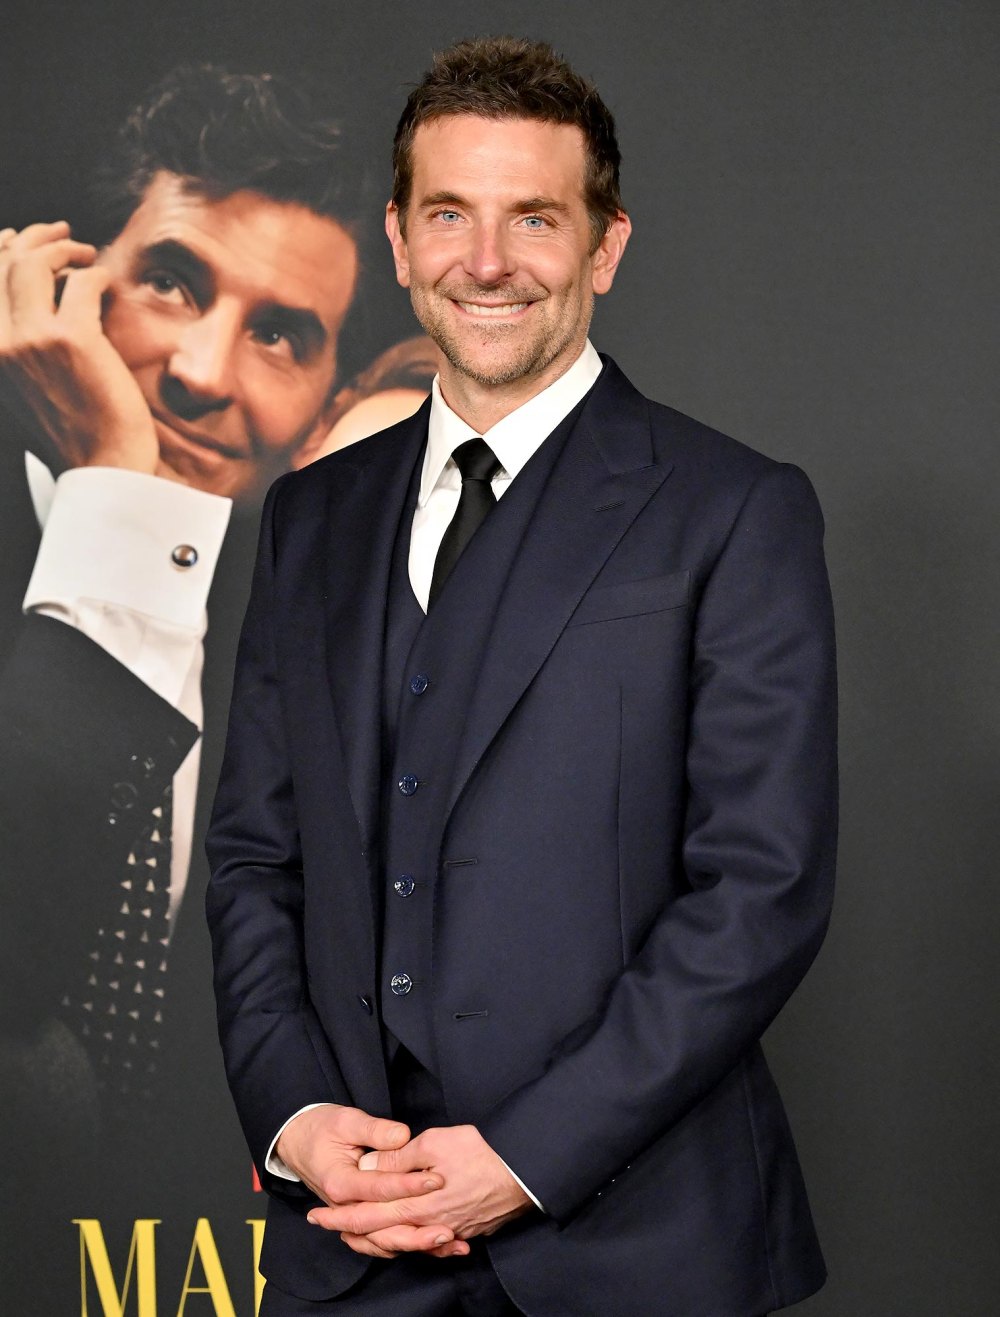 Bradley Cooper Left Press Conference After Call From School Nurse | Us ...